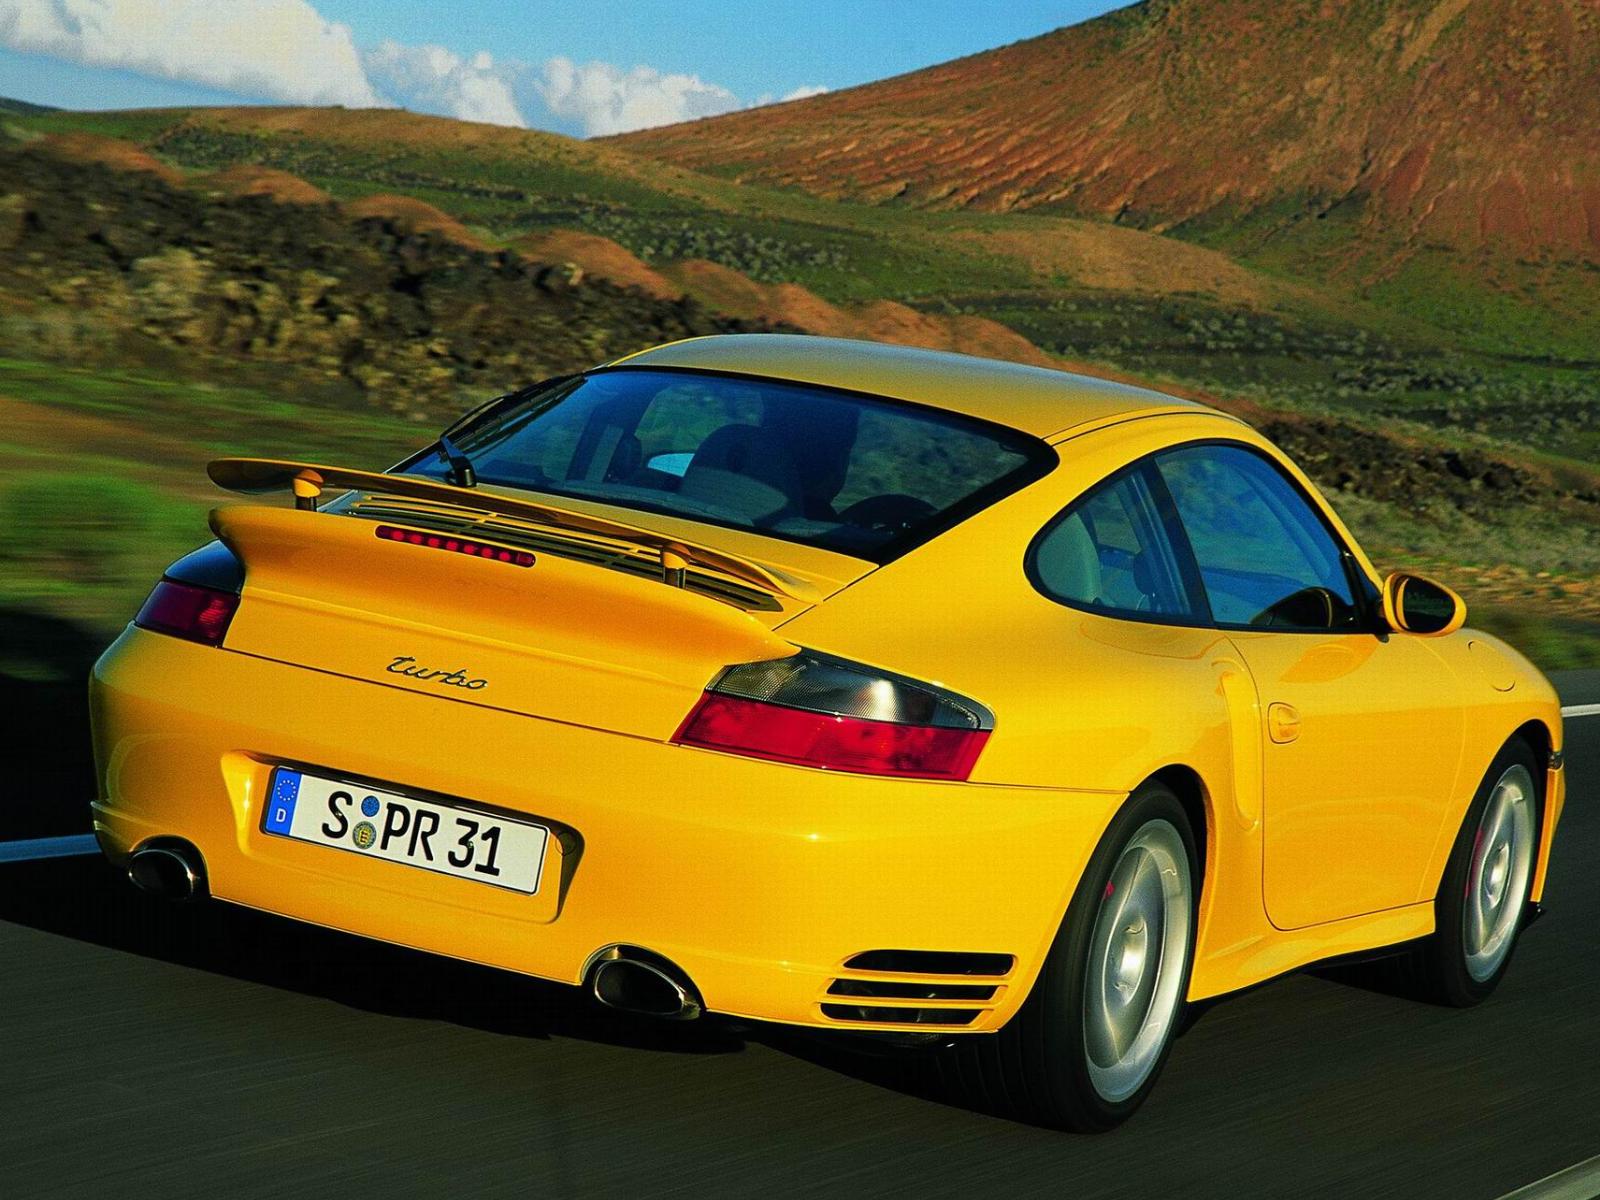 Porsche 996 911 Turbo Cars Wallpapers | Car Pictures | Cars Wallpaper